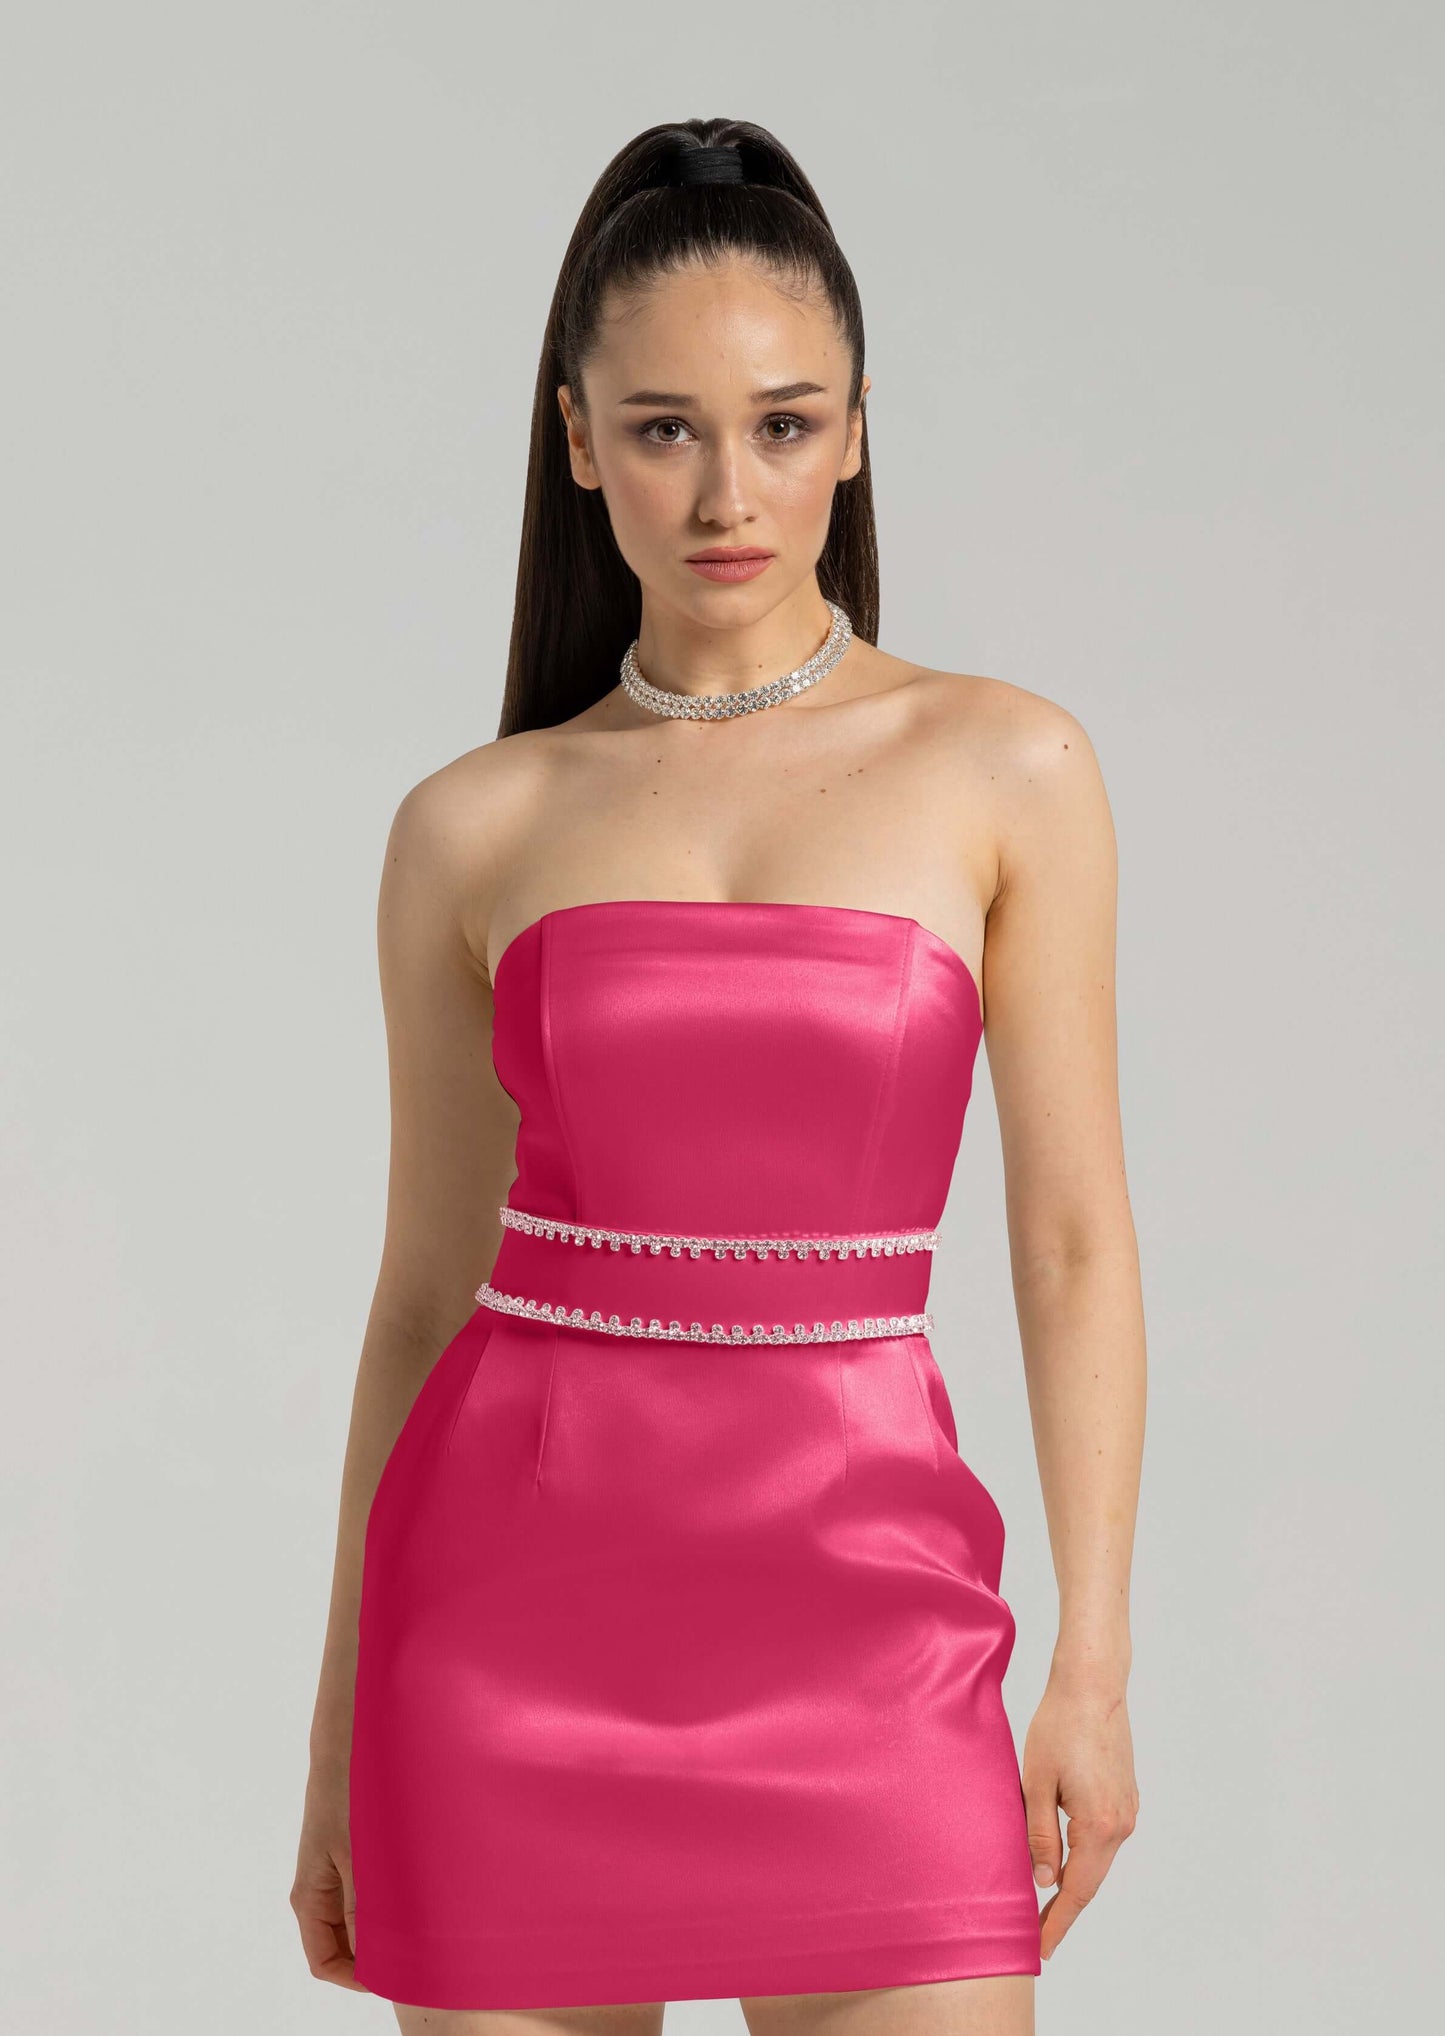 Elevated Excellence Mini Dress - Hot Pink by Tia Dorraine Women's Luxury Fashion Designer Clothing Brand